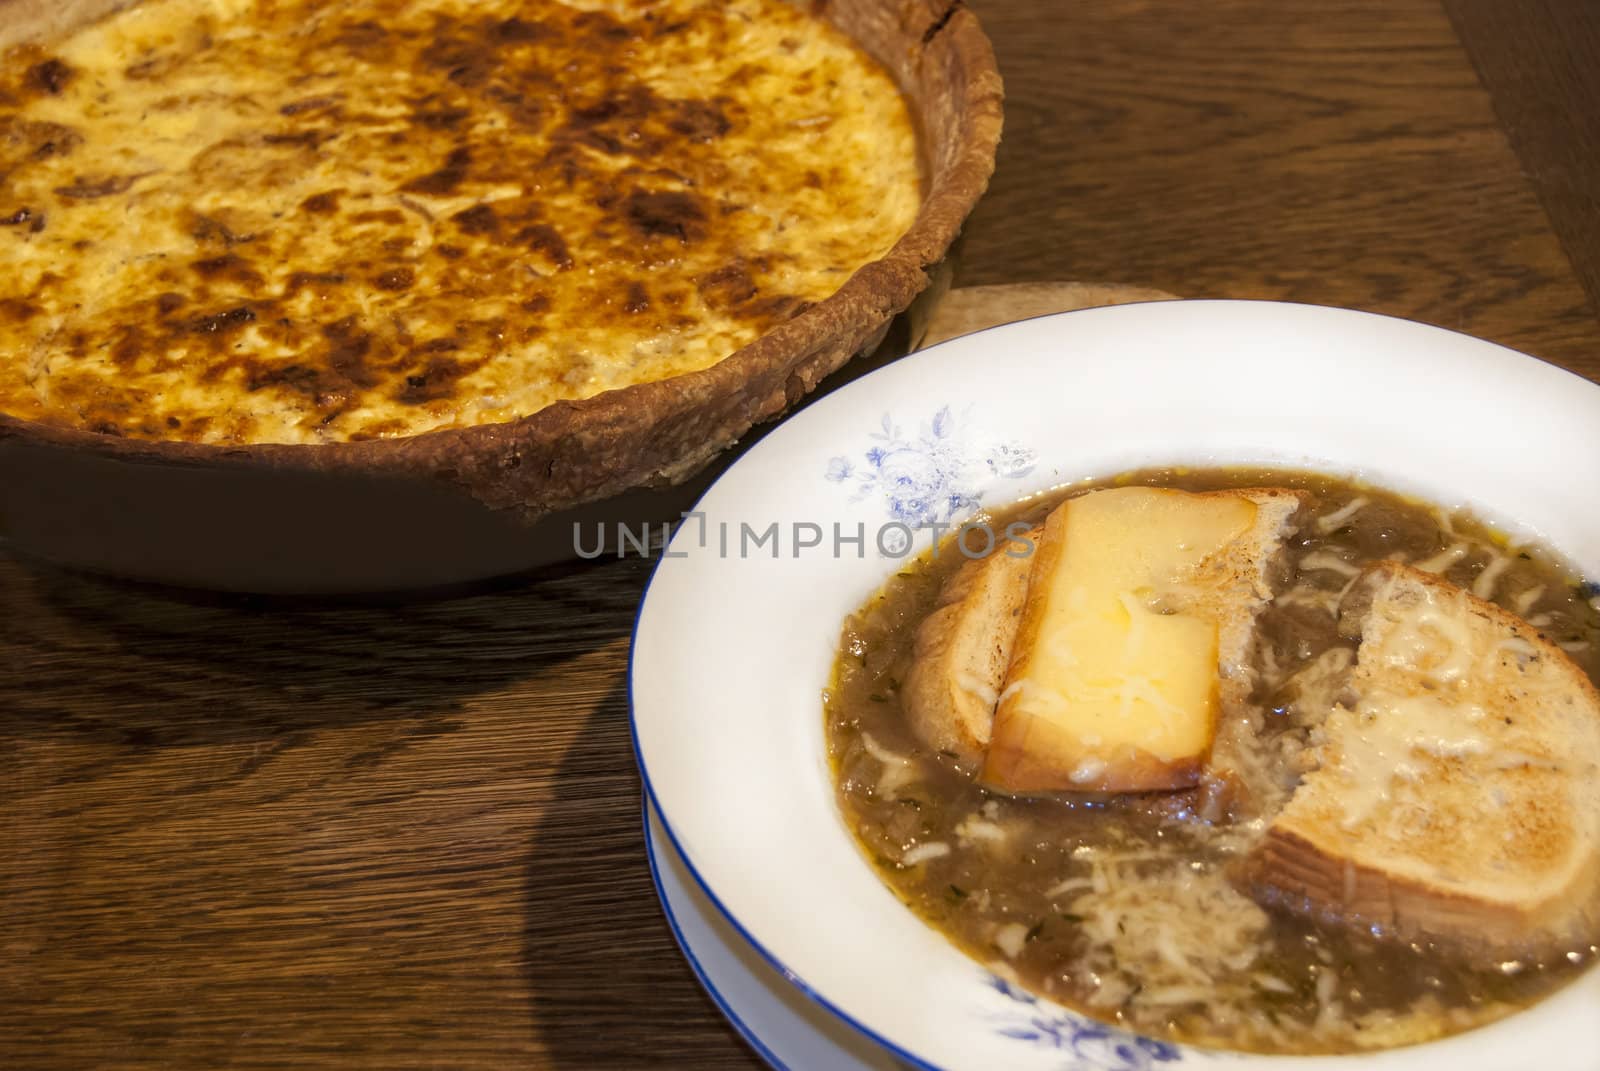 Onion soup and quiche pie by varbenov